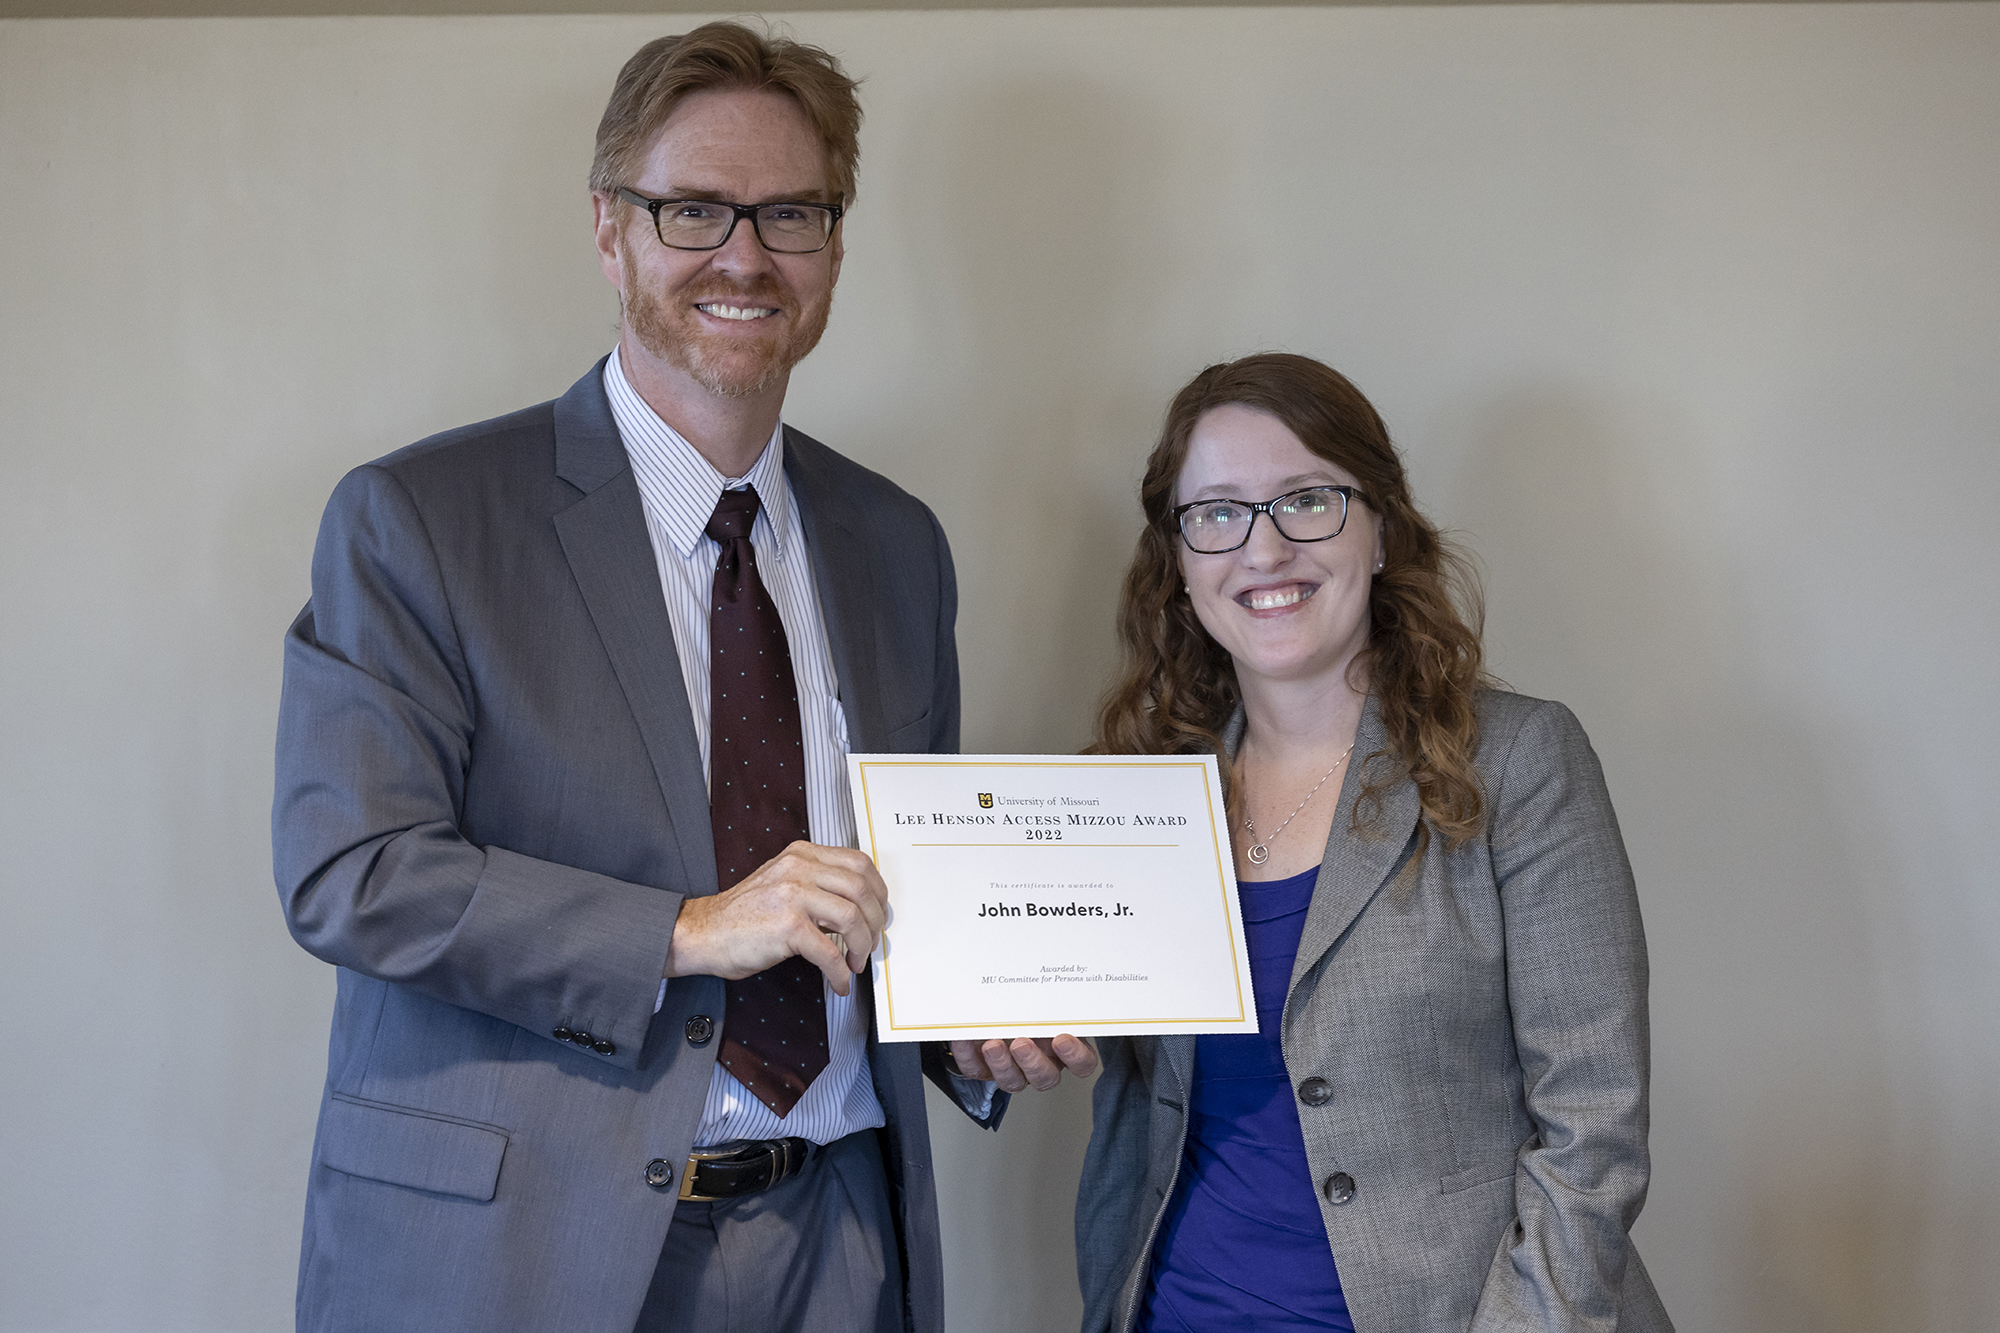 dean manring and amber cheek pose with a certificate